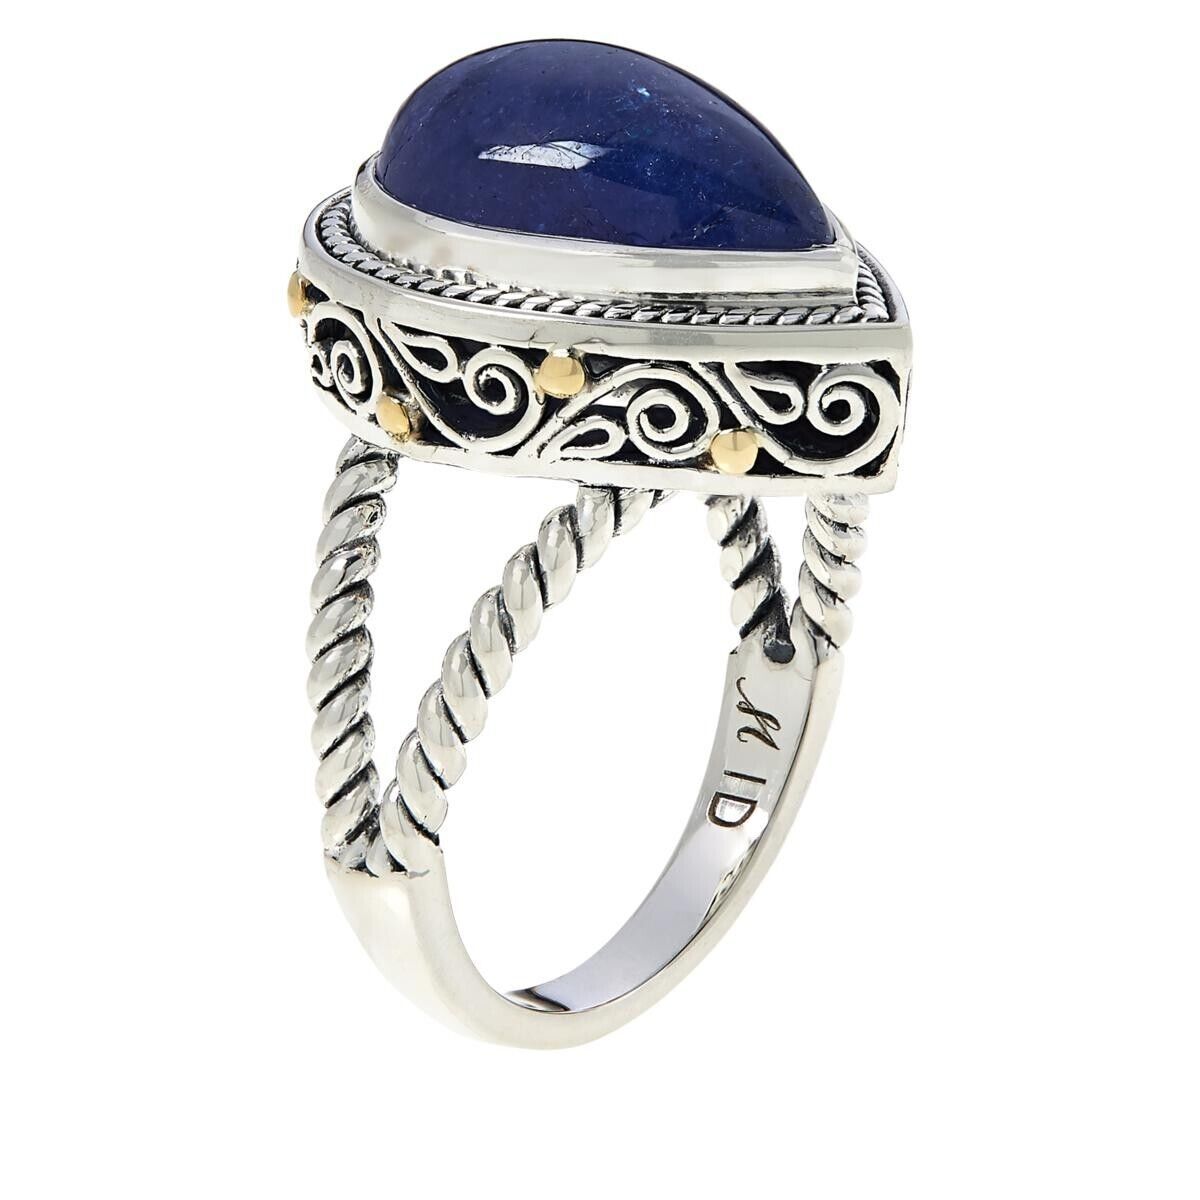 Bali RoManse Sterling Silver PearShaped Tanzanite Scrollwork Ring. Size 8